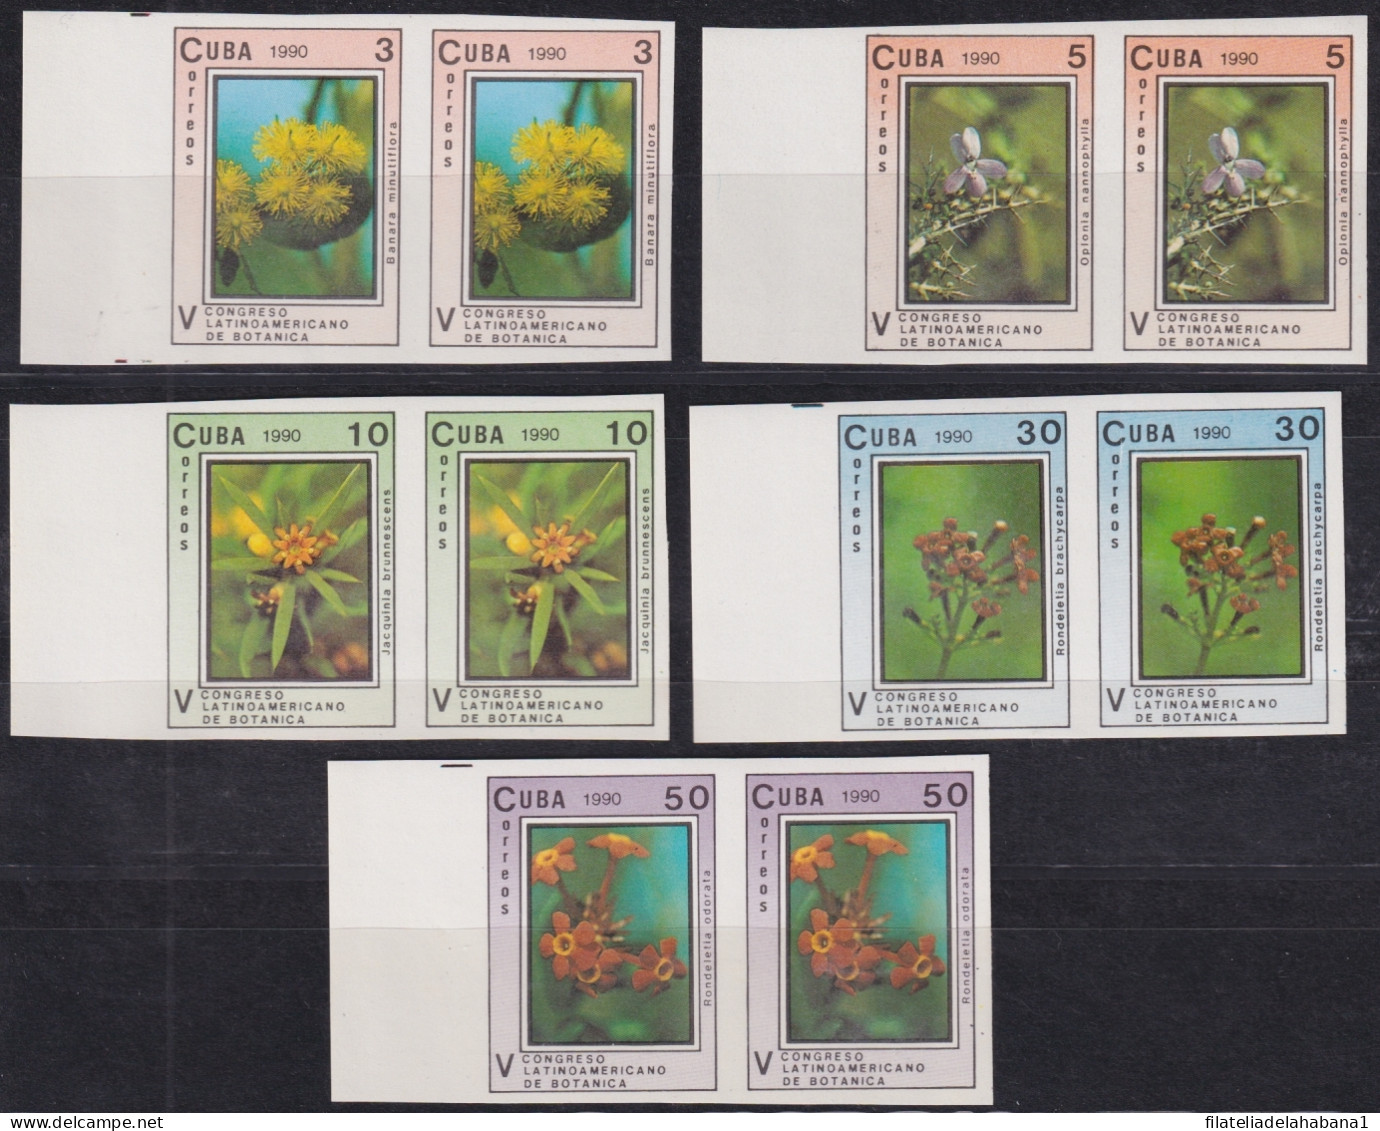 1990.122 CUBA MNH 1990 IMPERFORATED PROOF BOTANICAL CONGRESS FLOWER FLORES PAIR.  - Imperforates, Proofs & Errors